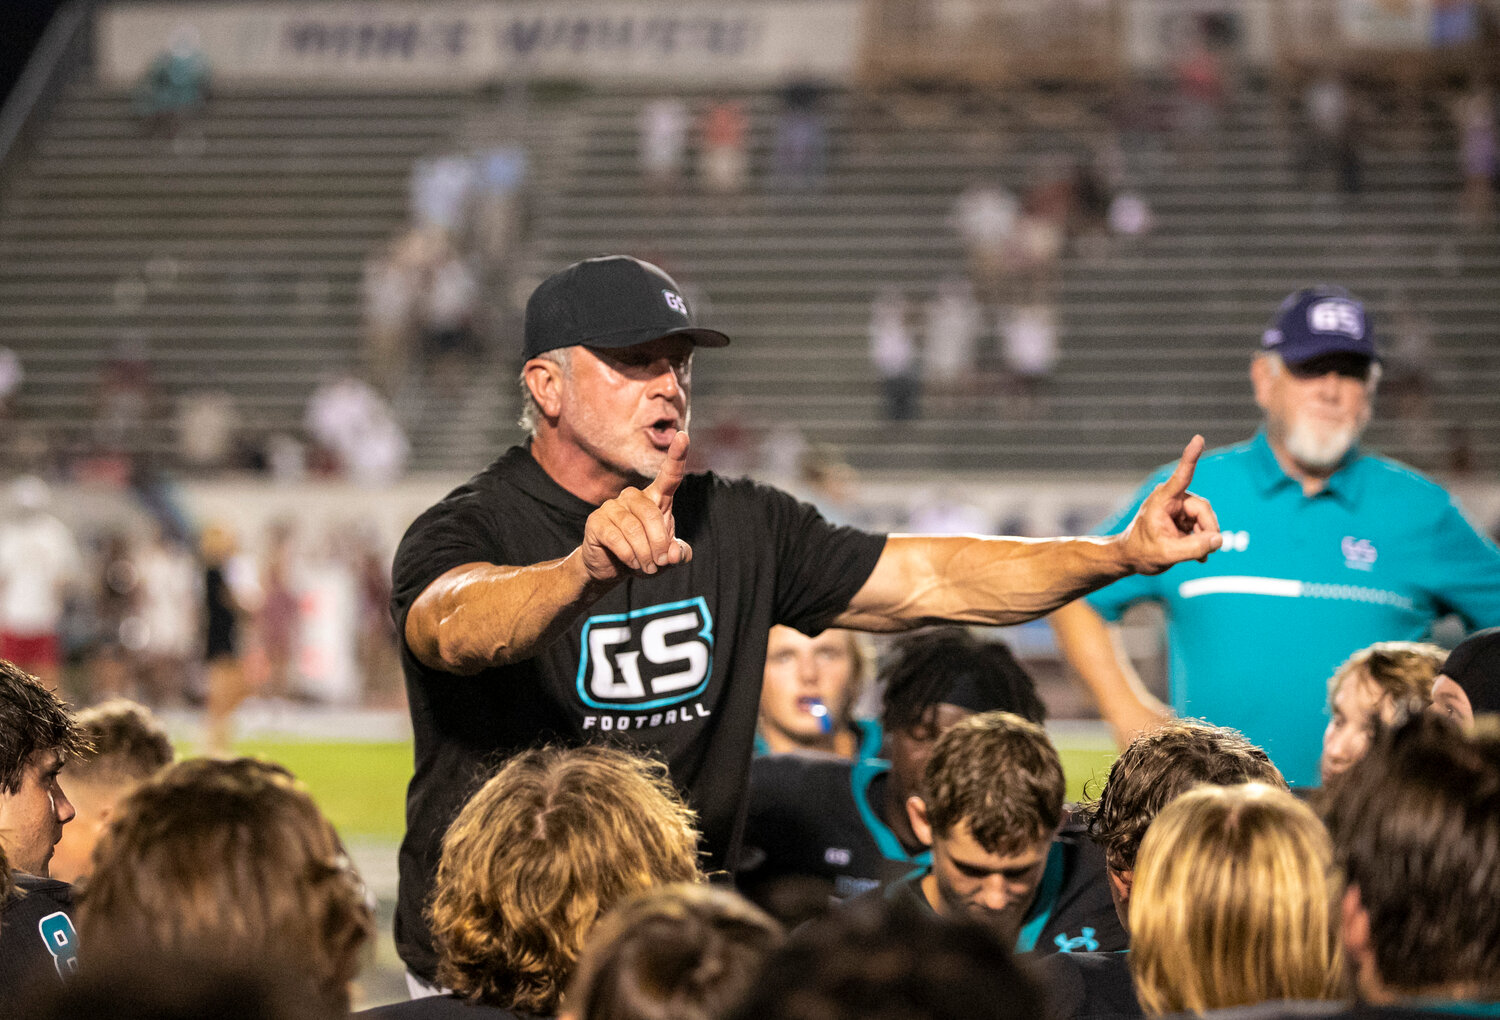 Gulf Shores head football coach Mark Hudspeth congratulates the Dolphins for recording the program’s first victory over the UMS-Wright Bulldogs after a 17-0 decision at Mickey Miller Blackwell Stadium on Sept. 15. On Friday night, Gulf Shores wrapped up its first regular-season region title with a 42-12 win over No. 10 Vigor.